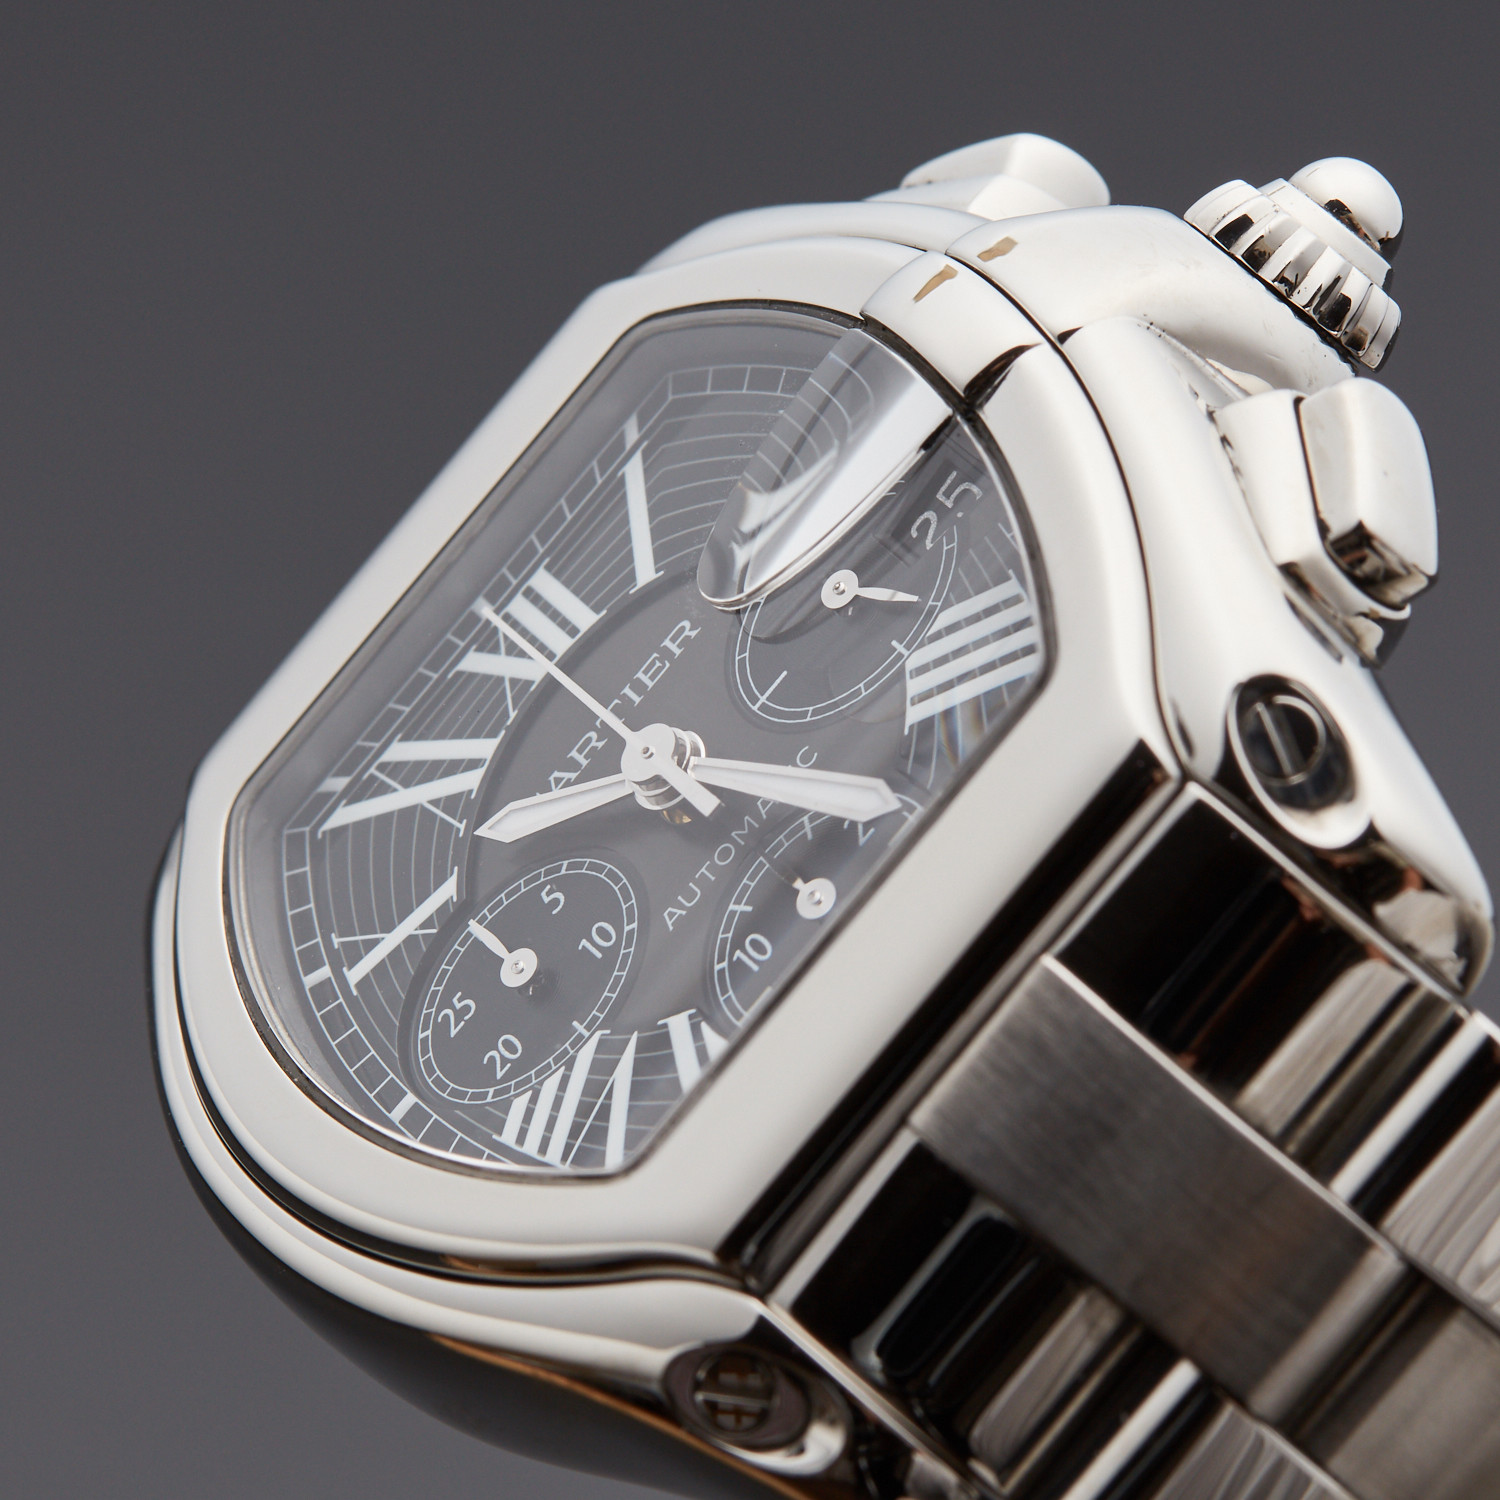 Cartier Roadster XL Chronograph Automatic // 2618 // Store Display